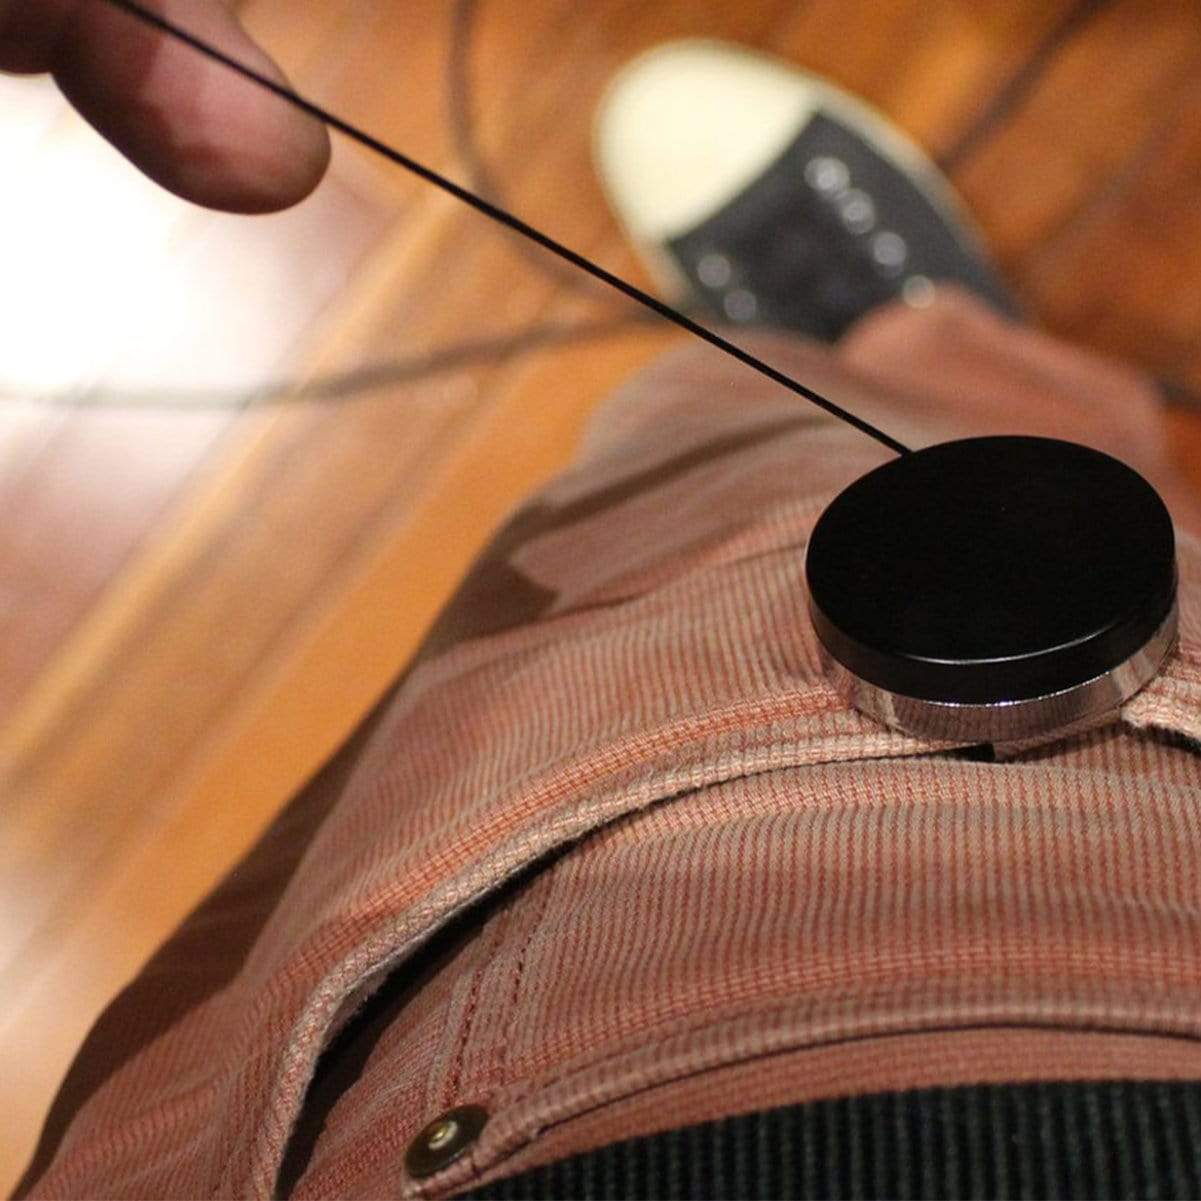 A person attached a Black Chrome Heavy Duty Badge Reel with Belt Clip (2120-3300) to their pants pocket while standing on a wooden floor. Only part of their hand and pants are visible.